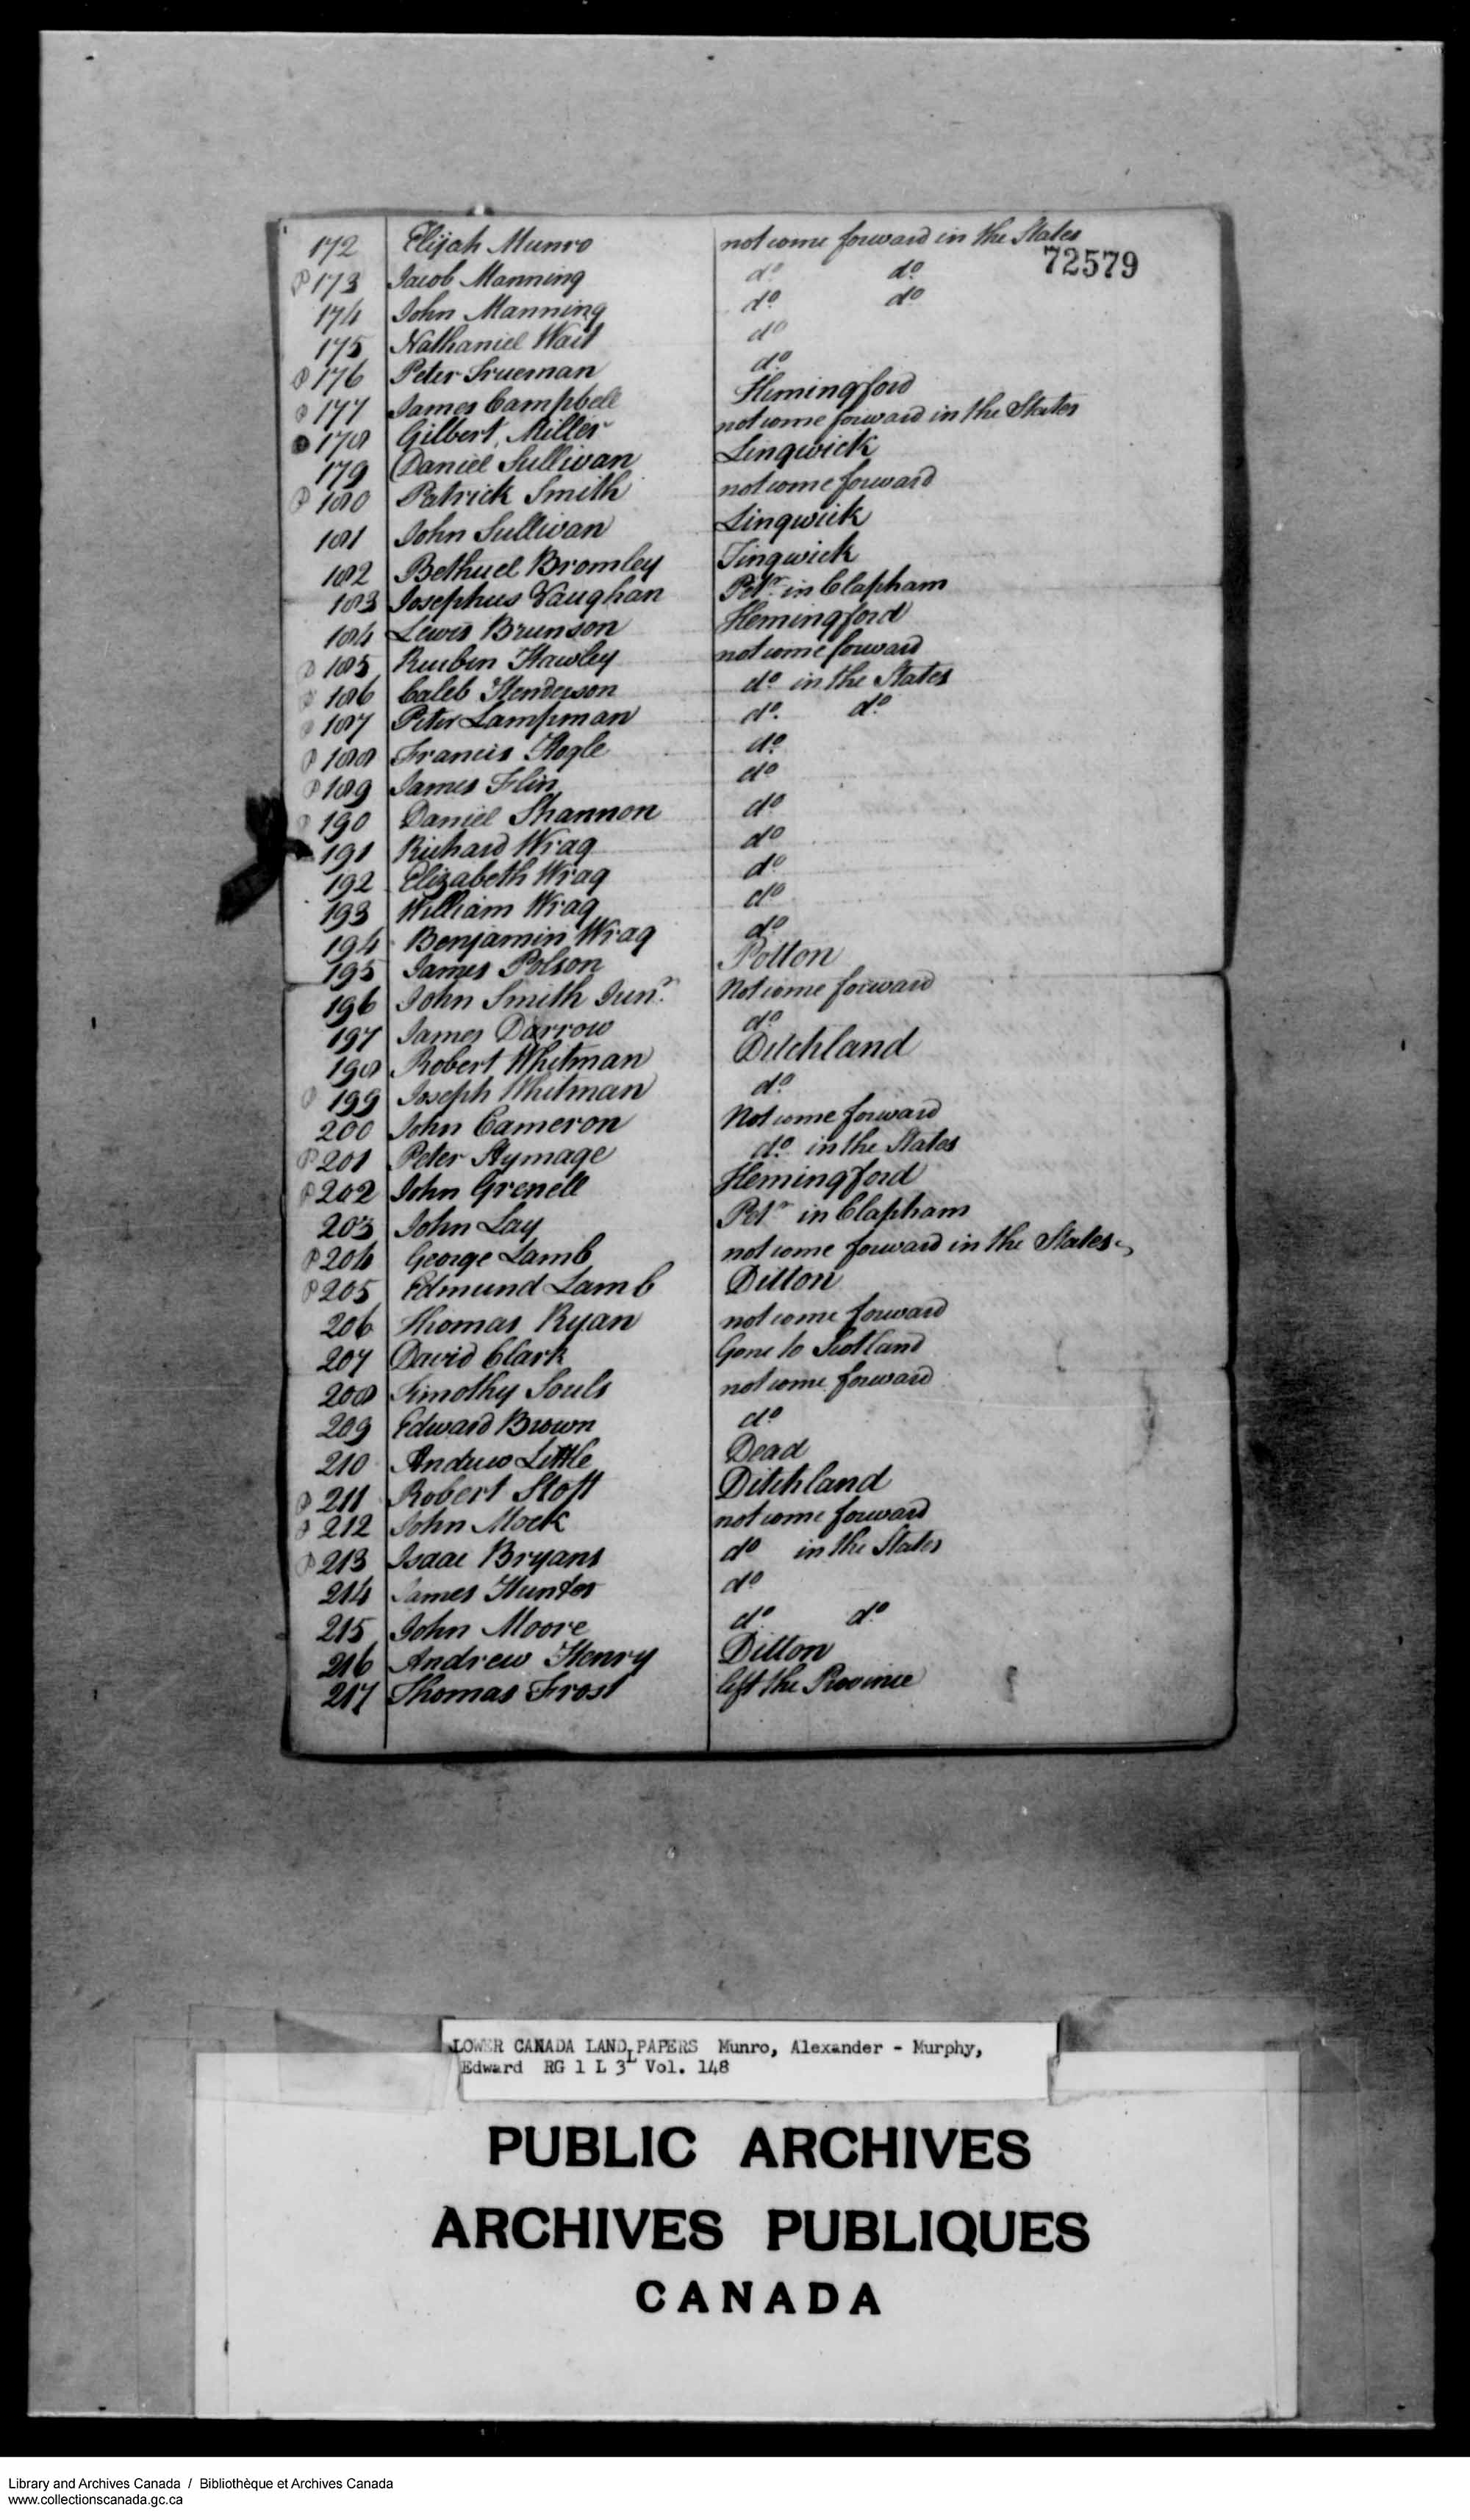 Digitized page of  for Image No.: e008718205